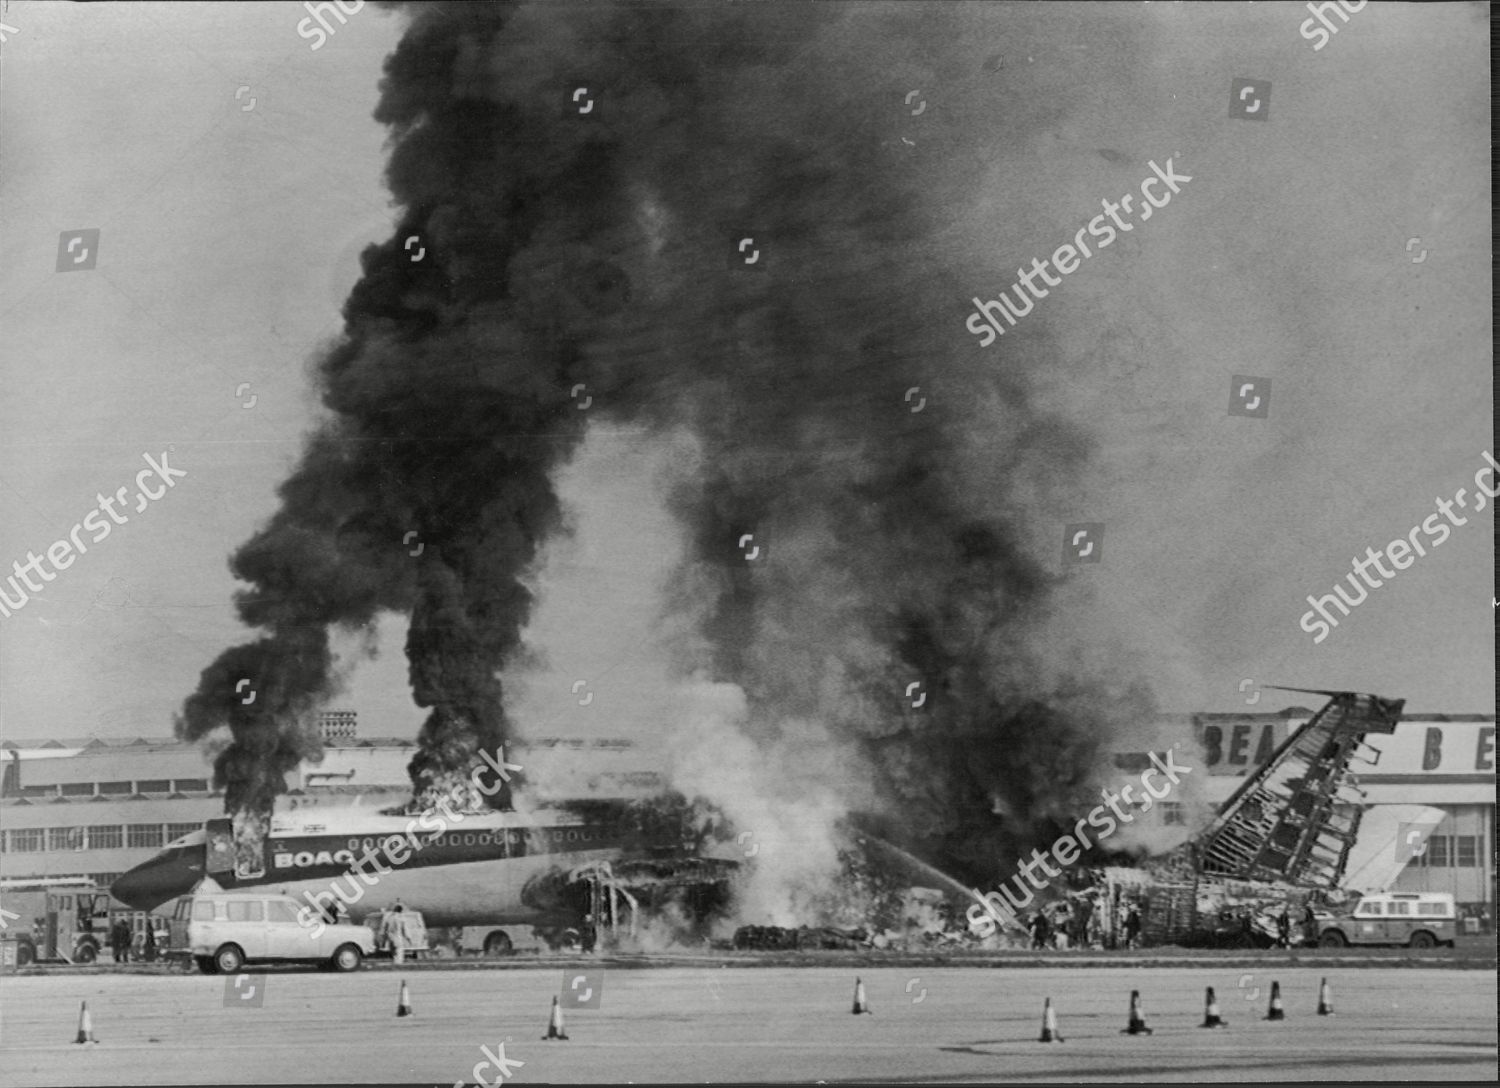 Boac Boeing 707 Airliner Crashed Flames Minutes Editorial Stock Photo Stock Image Shutterstock